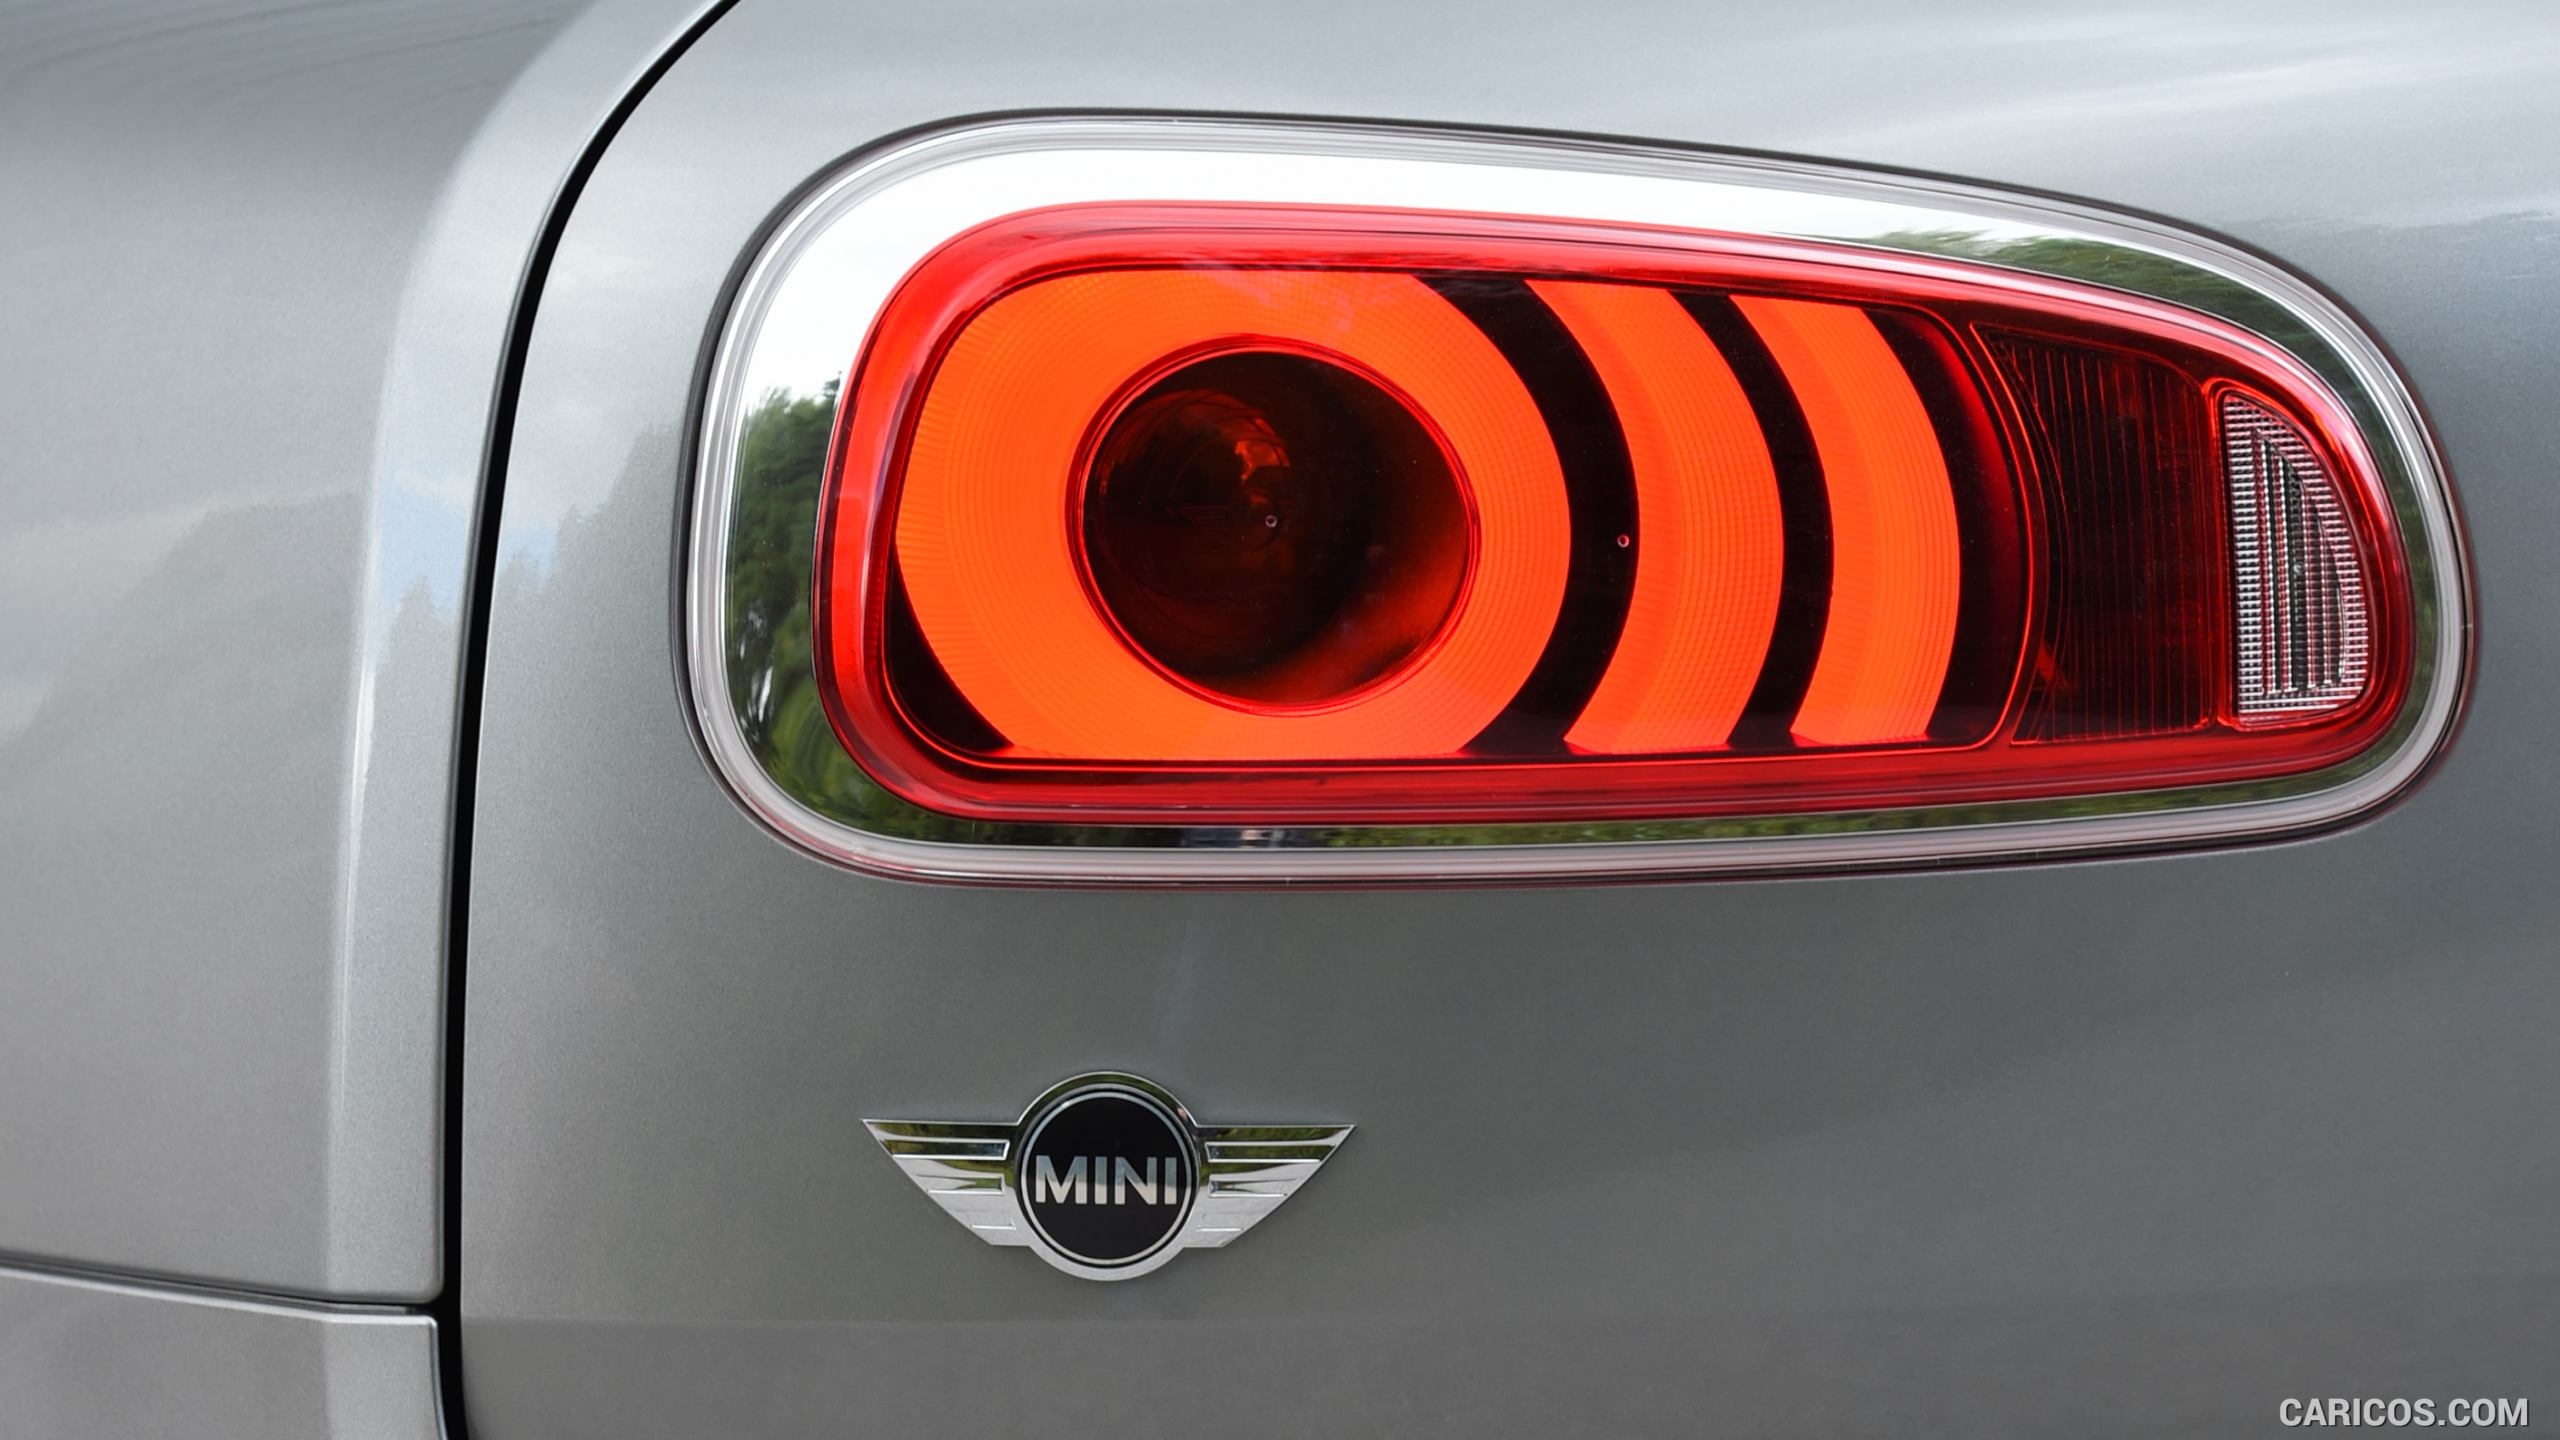 2016 MINI Cooper S Clubman in Metallic Melting Silver - Tail Light, #216 of 380